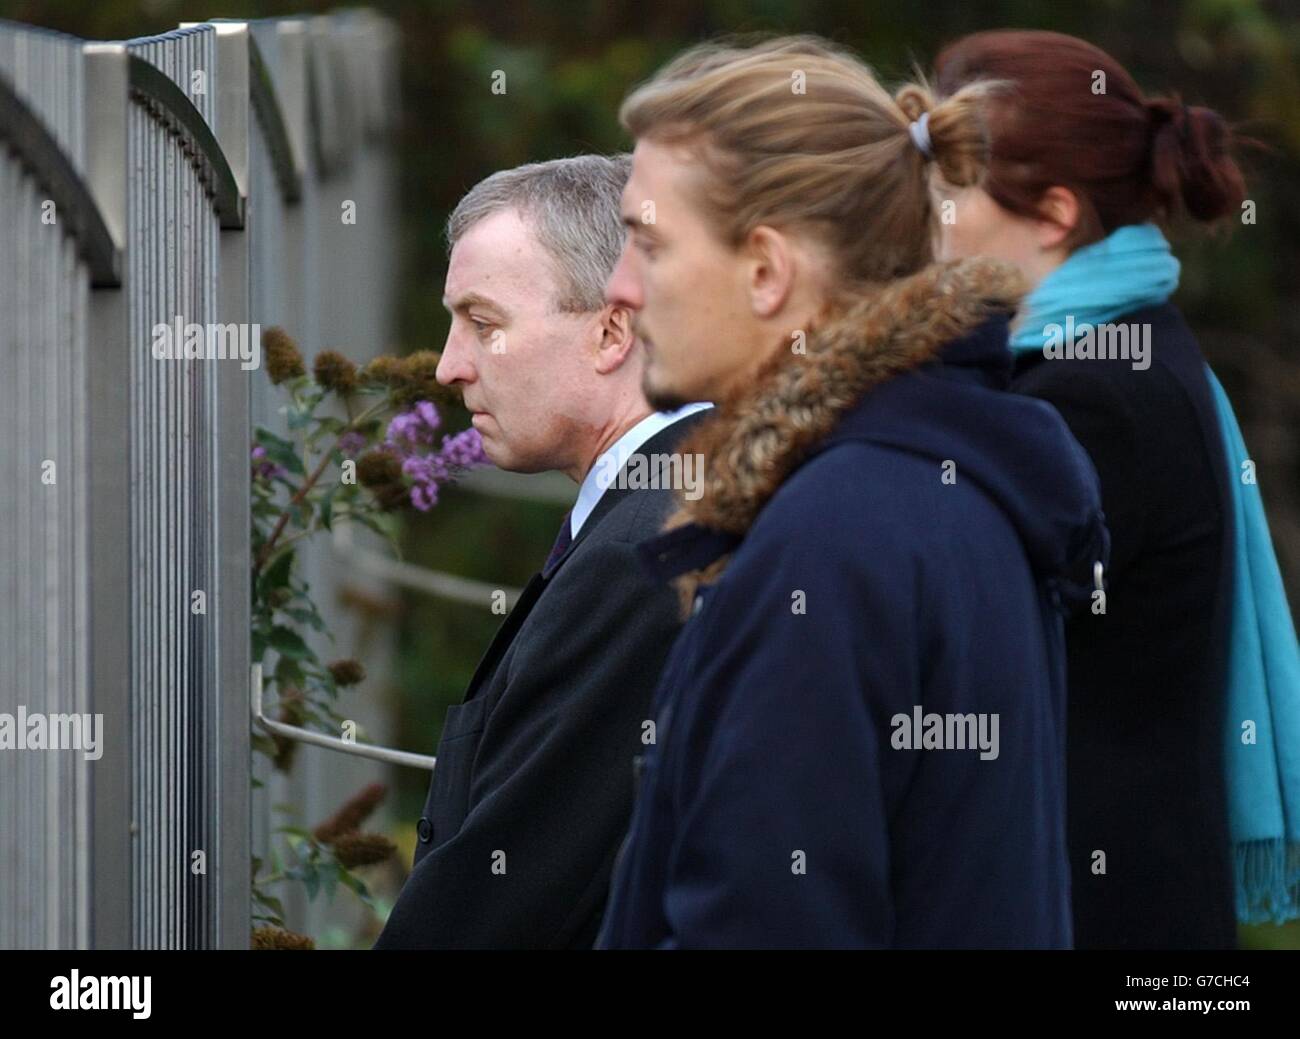 People including survivor Richard Castle (left), pay their respects at the side of the railway line in London's Ladbroke Grove, on the fifth anniversary of the Paddington rail crash. Survivors and those who lost loved ones gathered close to the scene where 31 people died in the collision between a Thames Train and a Great Western express. Stock Photo